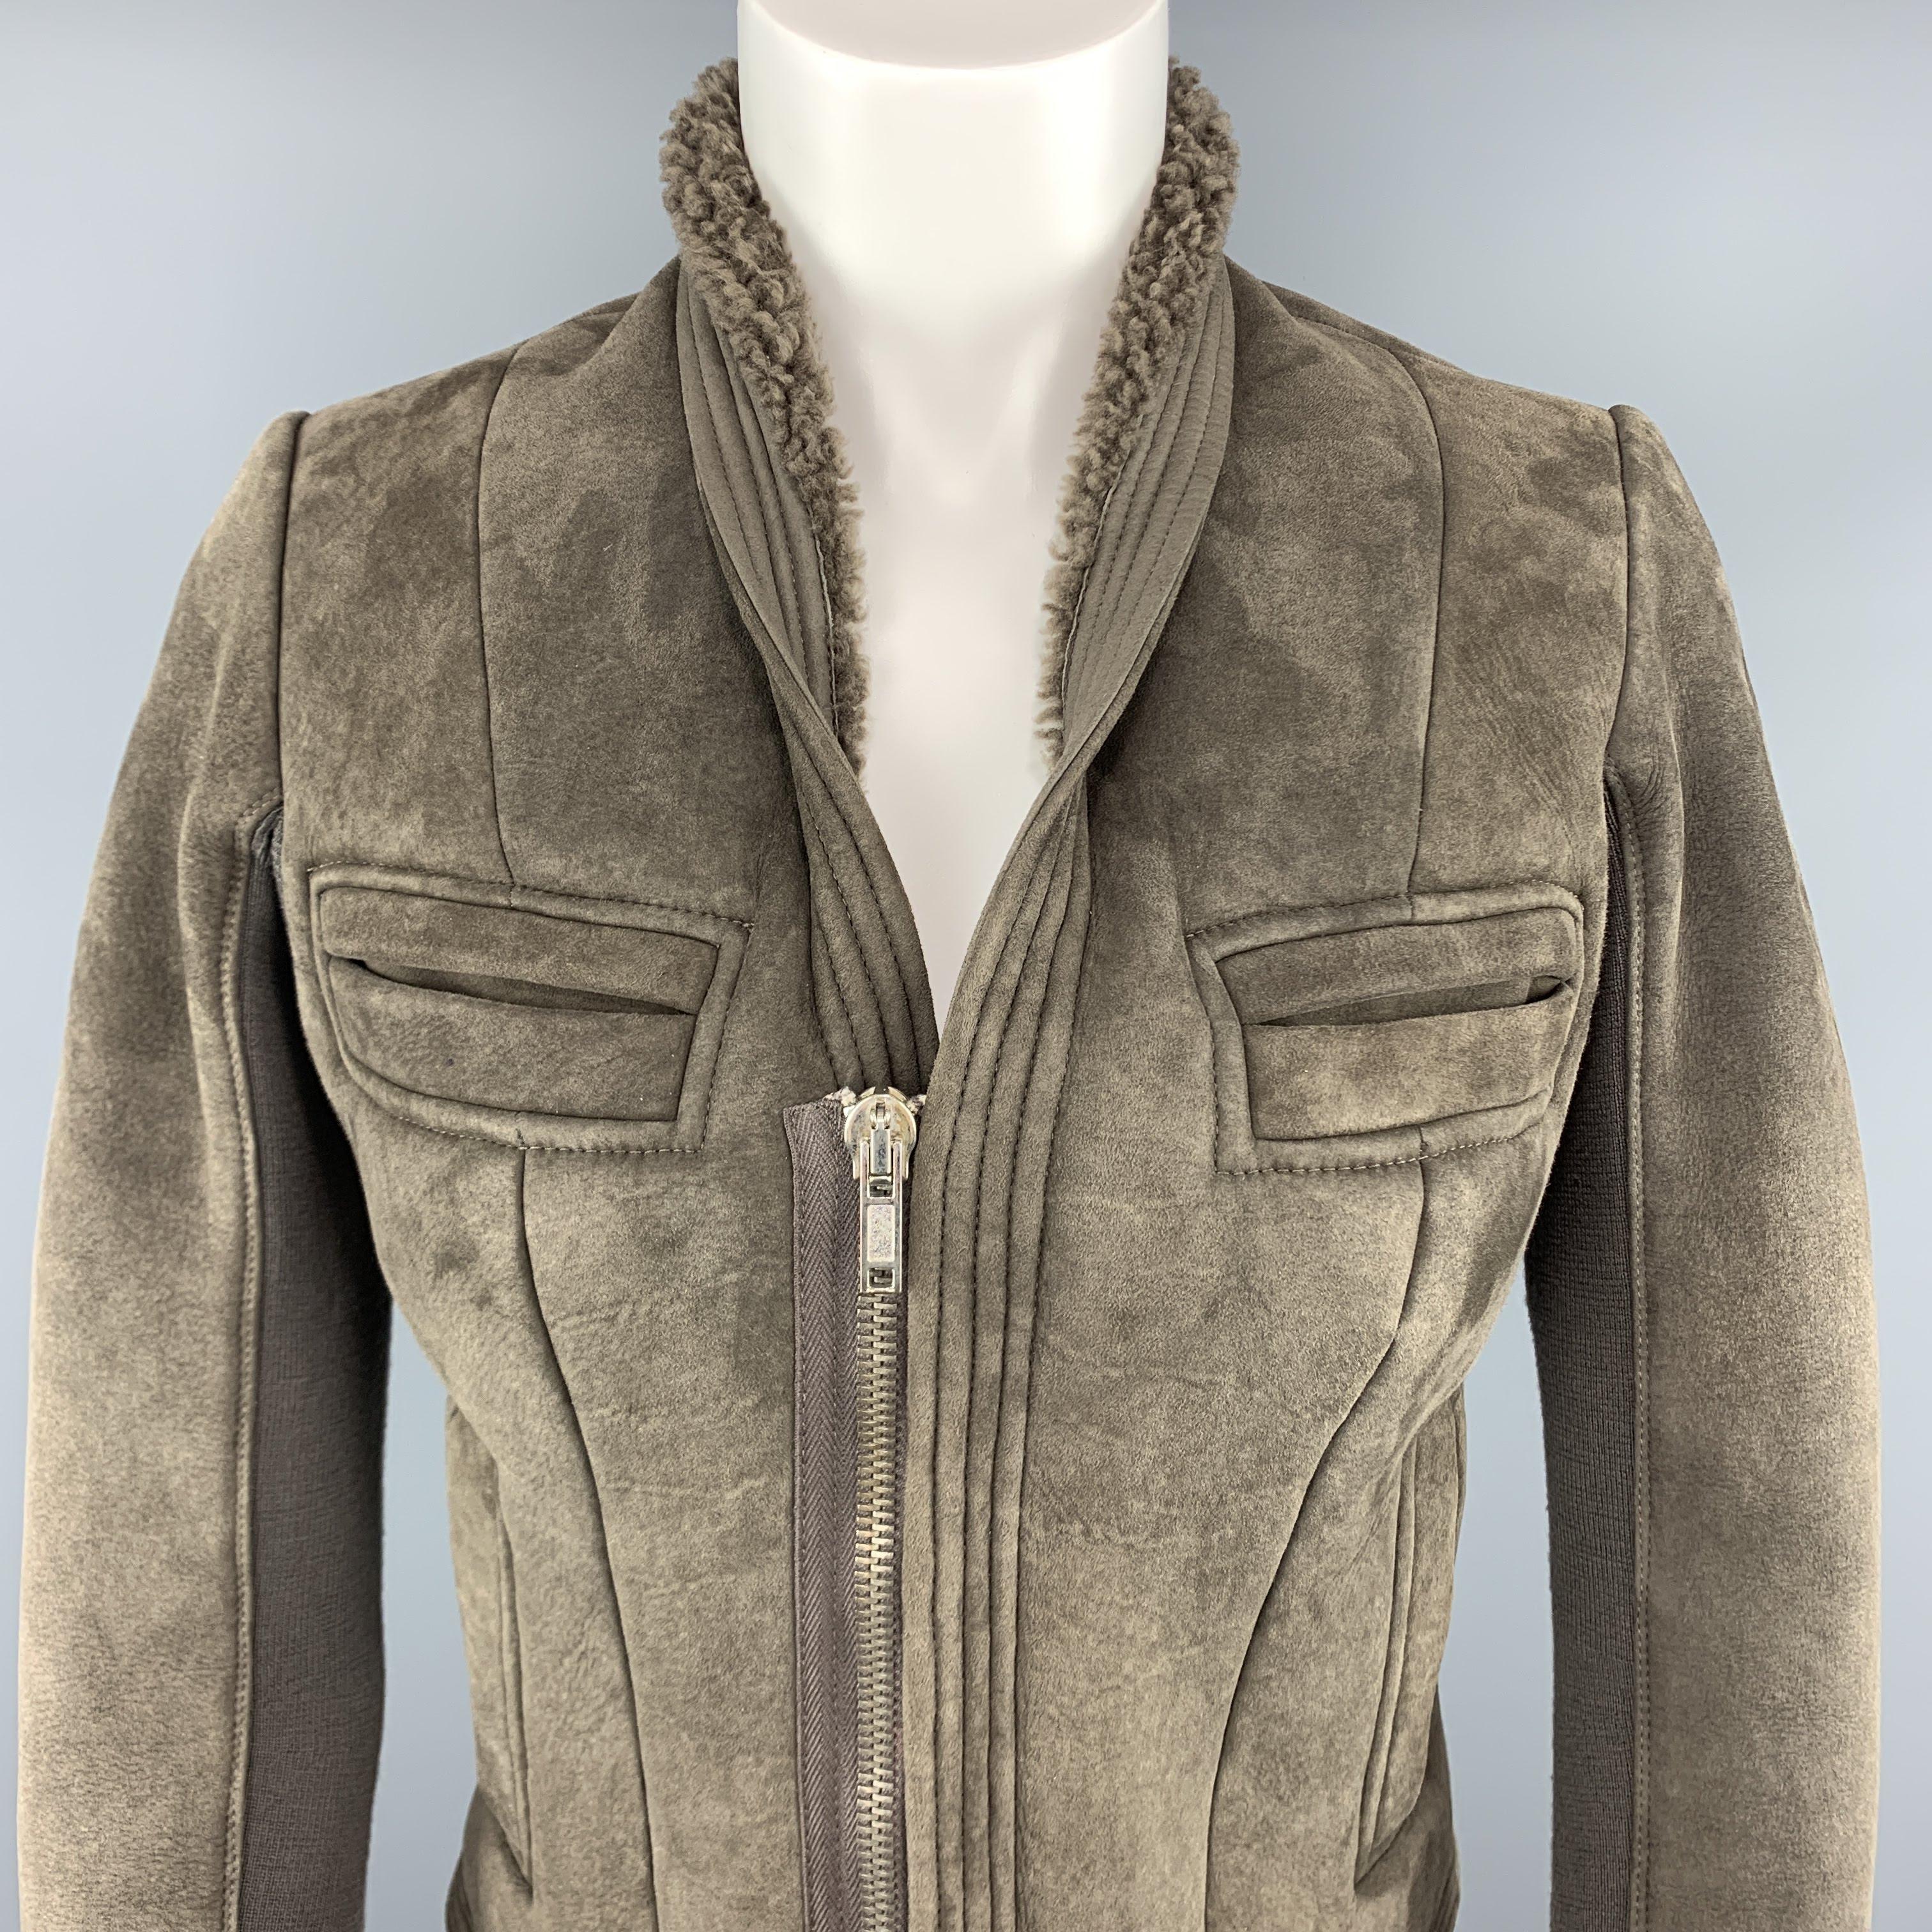 RICK OWENS jacket comes in muted olive taupe shearling with fur interior, slit pockets, and skinny sleeves with knit inner panel. Made It Italy.
 
Excellent Pre-Owned Condition.
Marked: 6
 
Measurements:
 
Shoulder: 14 in.
Bust: 36 in.
Sleeve: 27